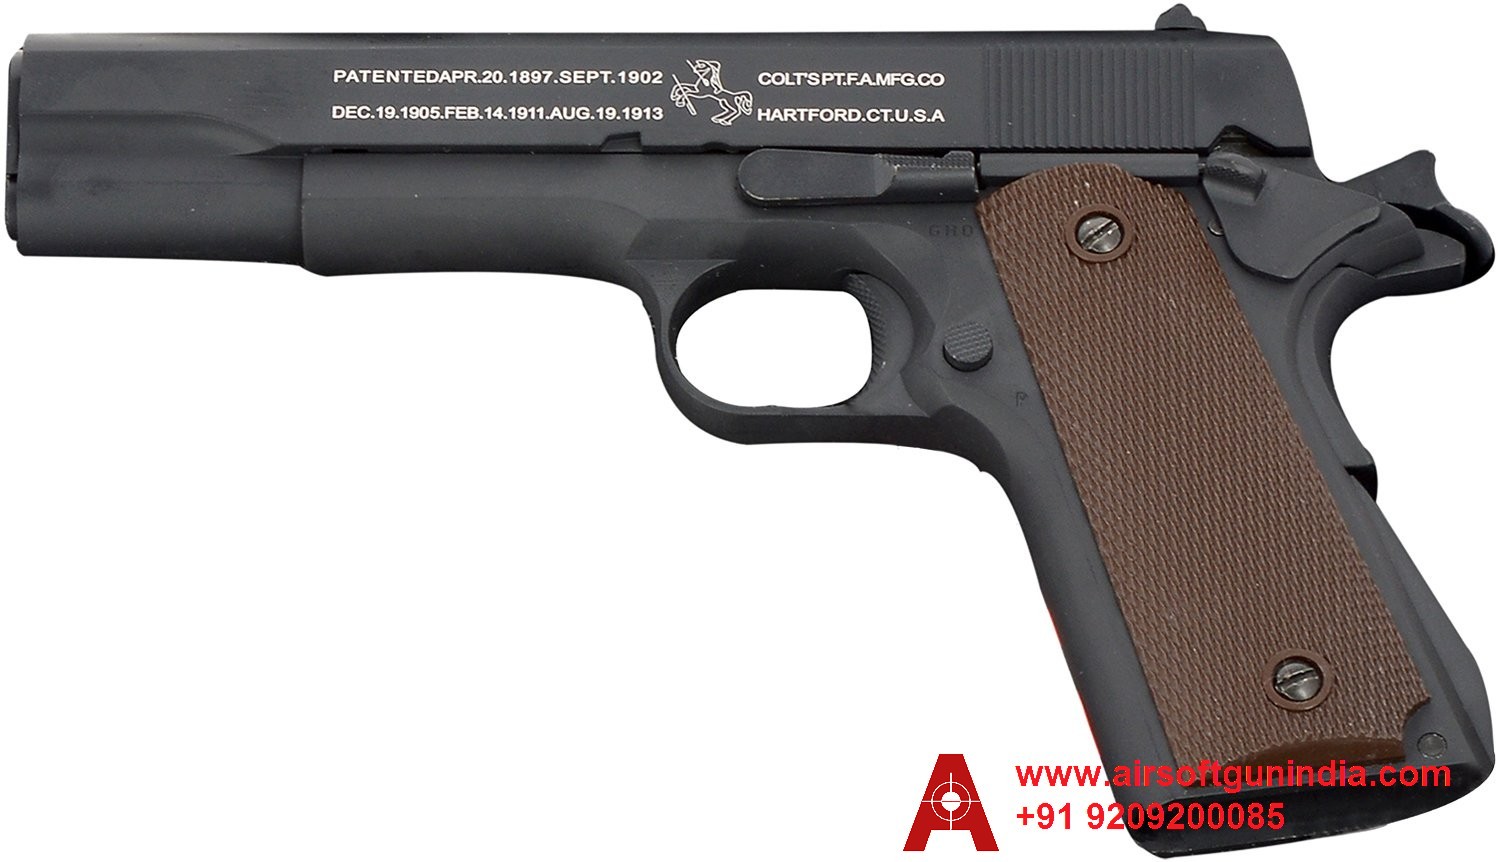 Bell 1911 By Airsoft Gun India